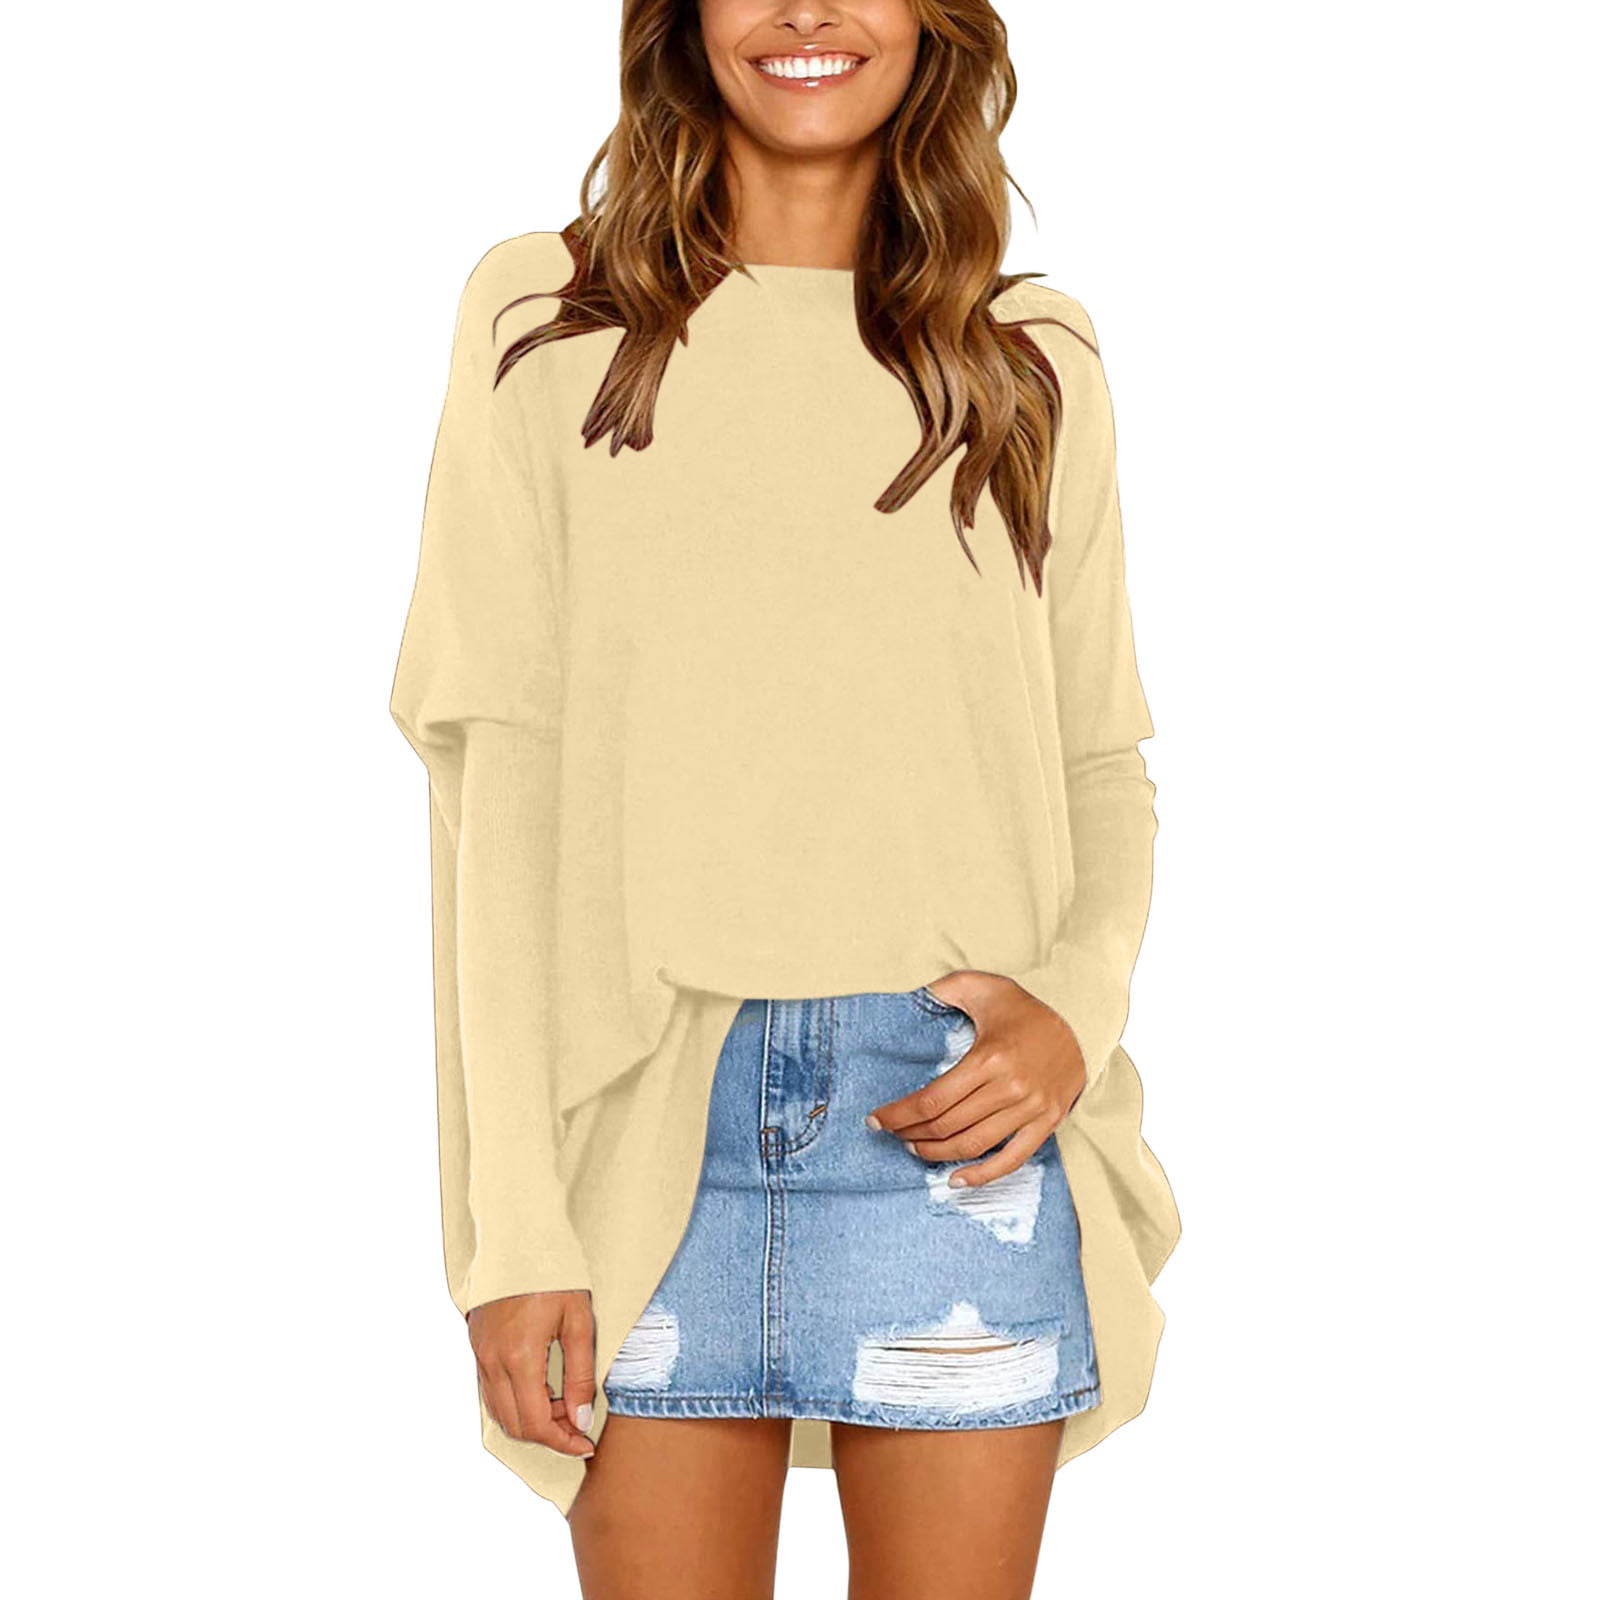 Buy LIYOHON Oversized T Shirts For Women Tunic Tops To Wear, 49% OFF